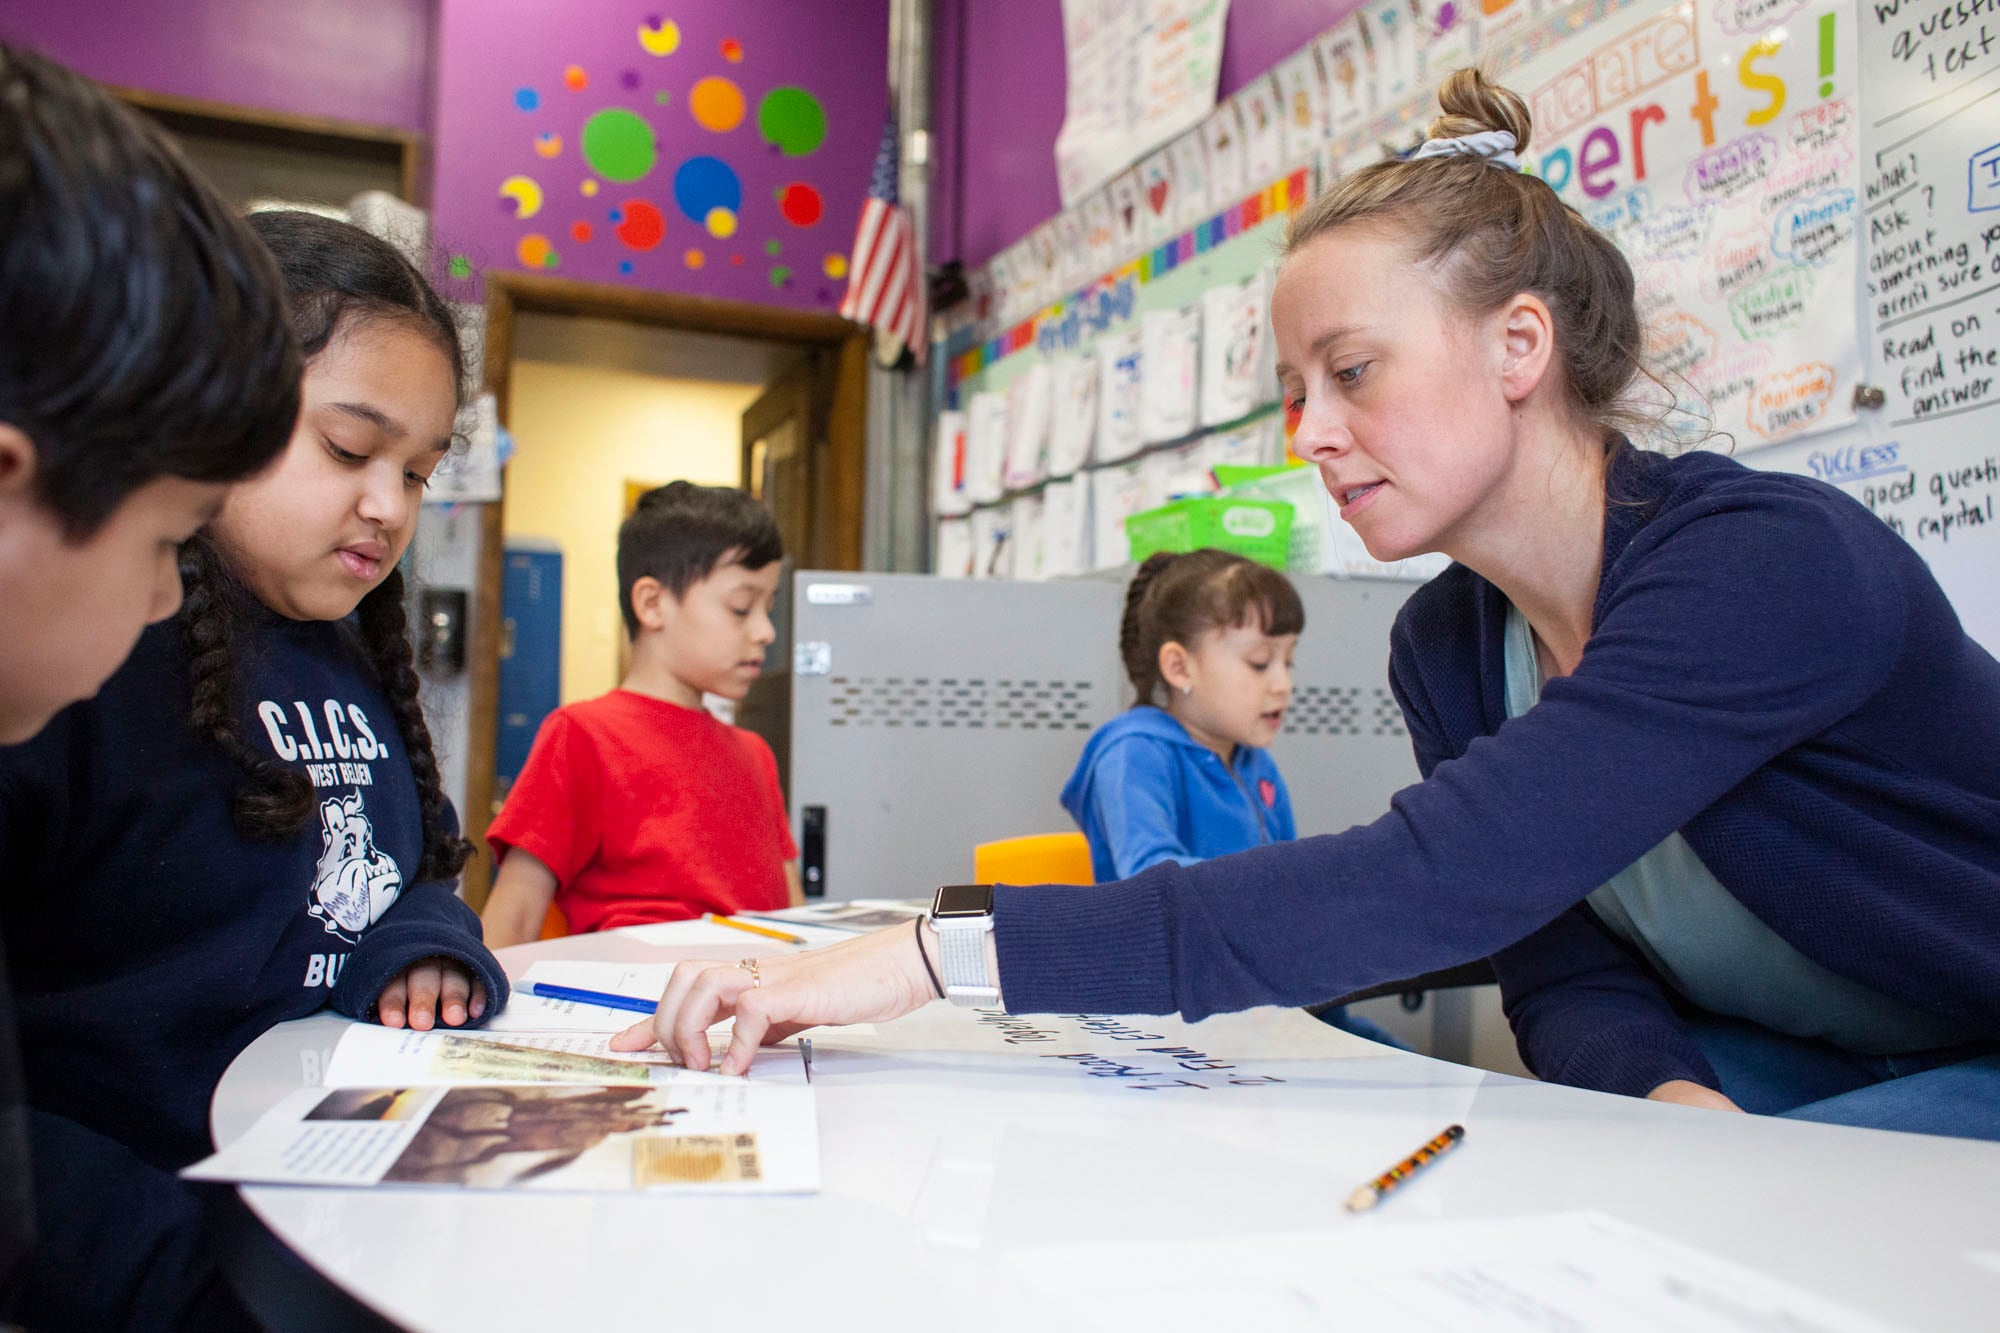 Teacher Kathy McInerney guides students during a small group lesson during class at CICS West Belden. The Chicago charter school employs the personalized learning method for its K-8 students. The school is part of the Chicago International Charter School network, and is managed by Distinctive Schools,.